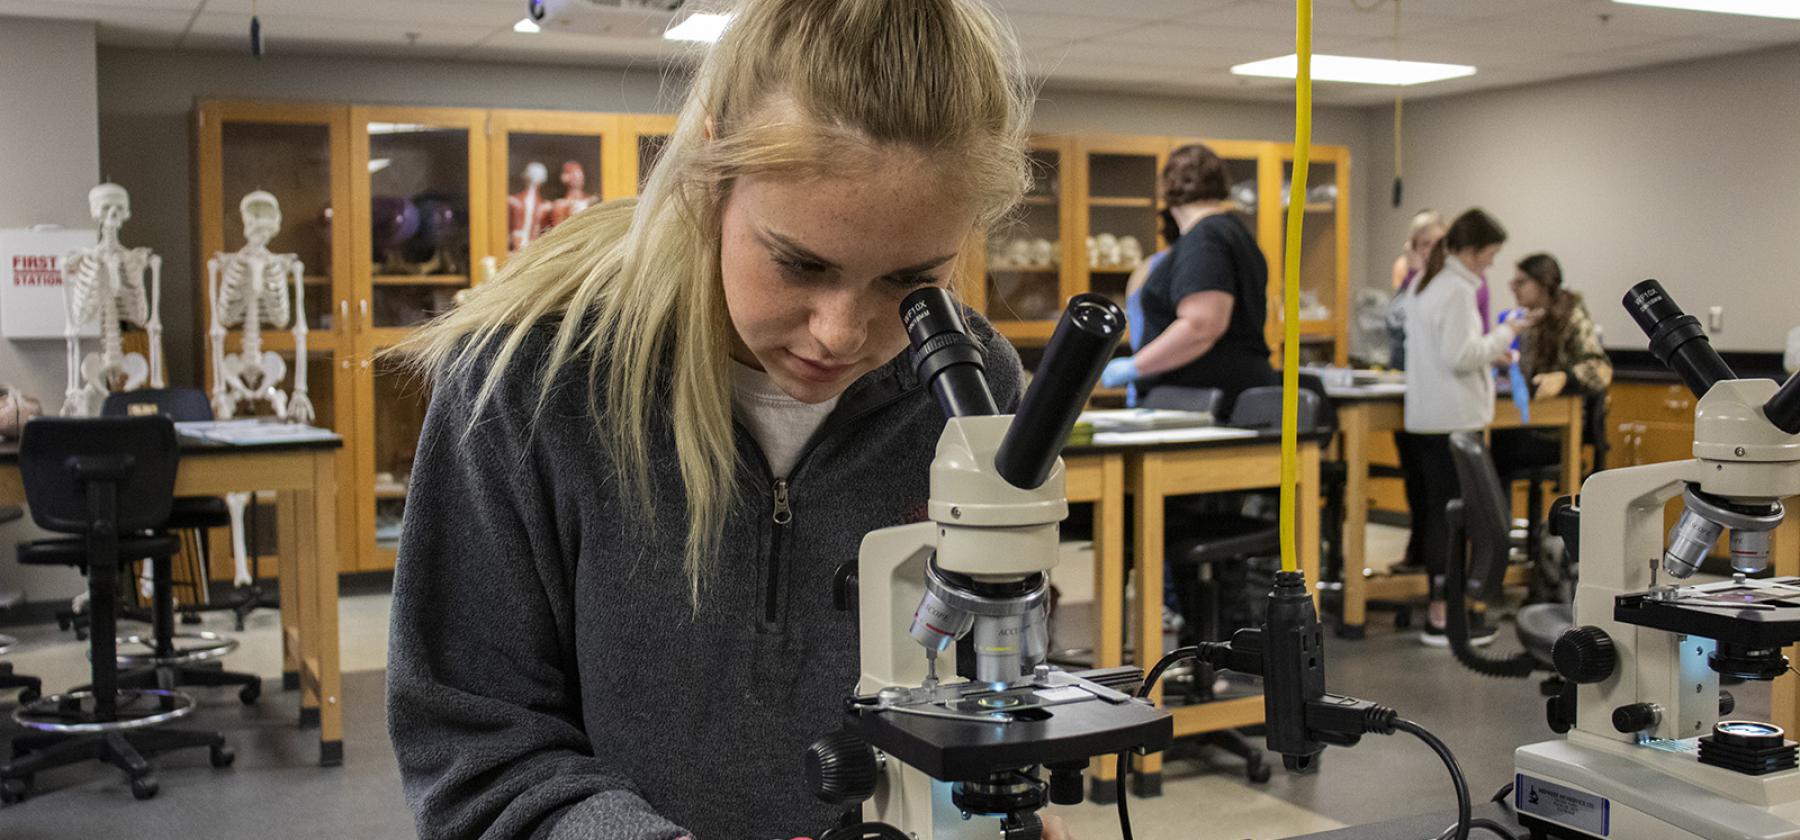 Science student using microscope